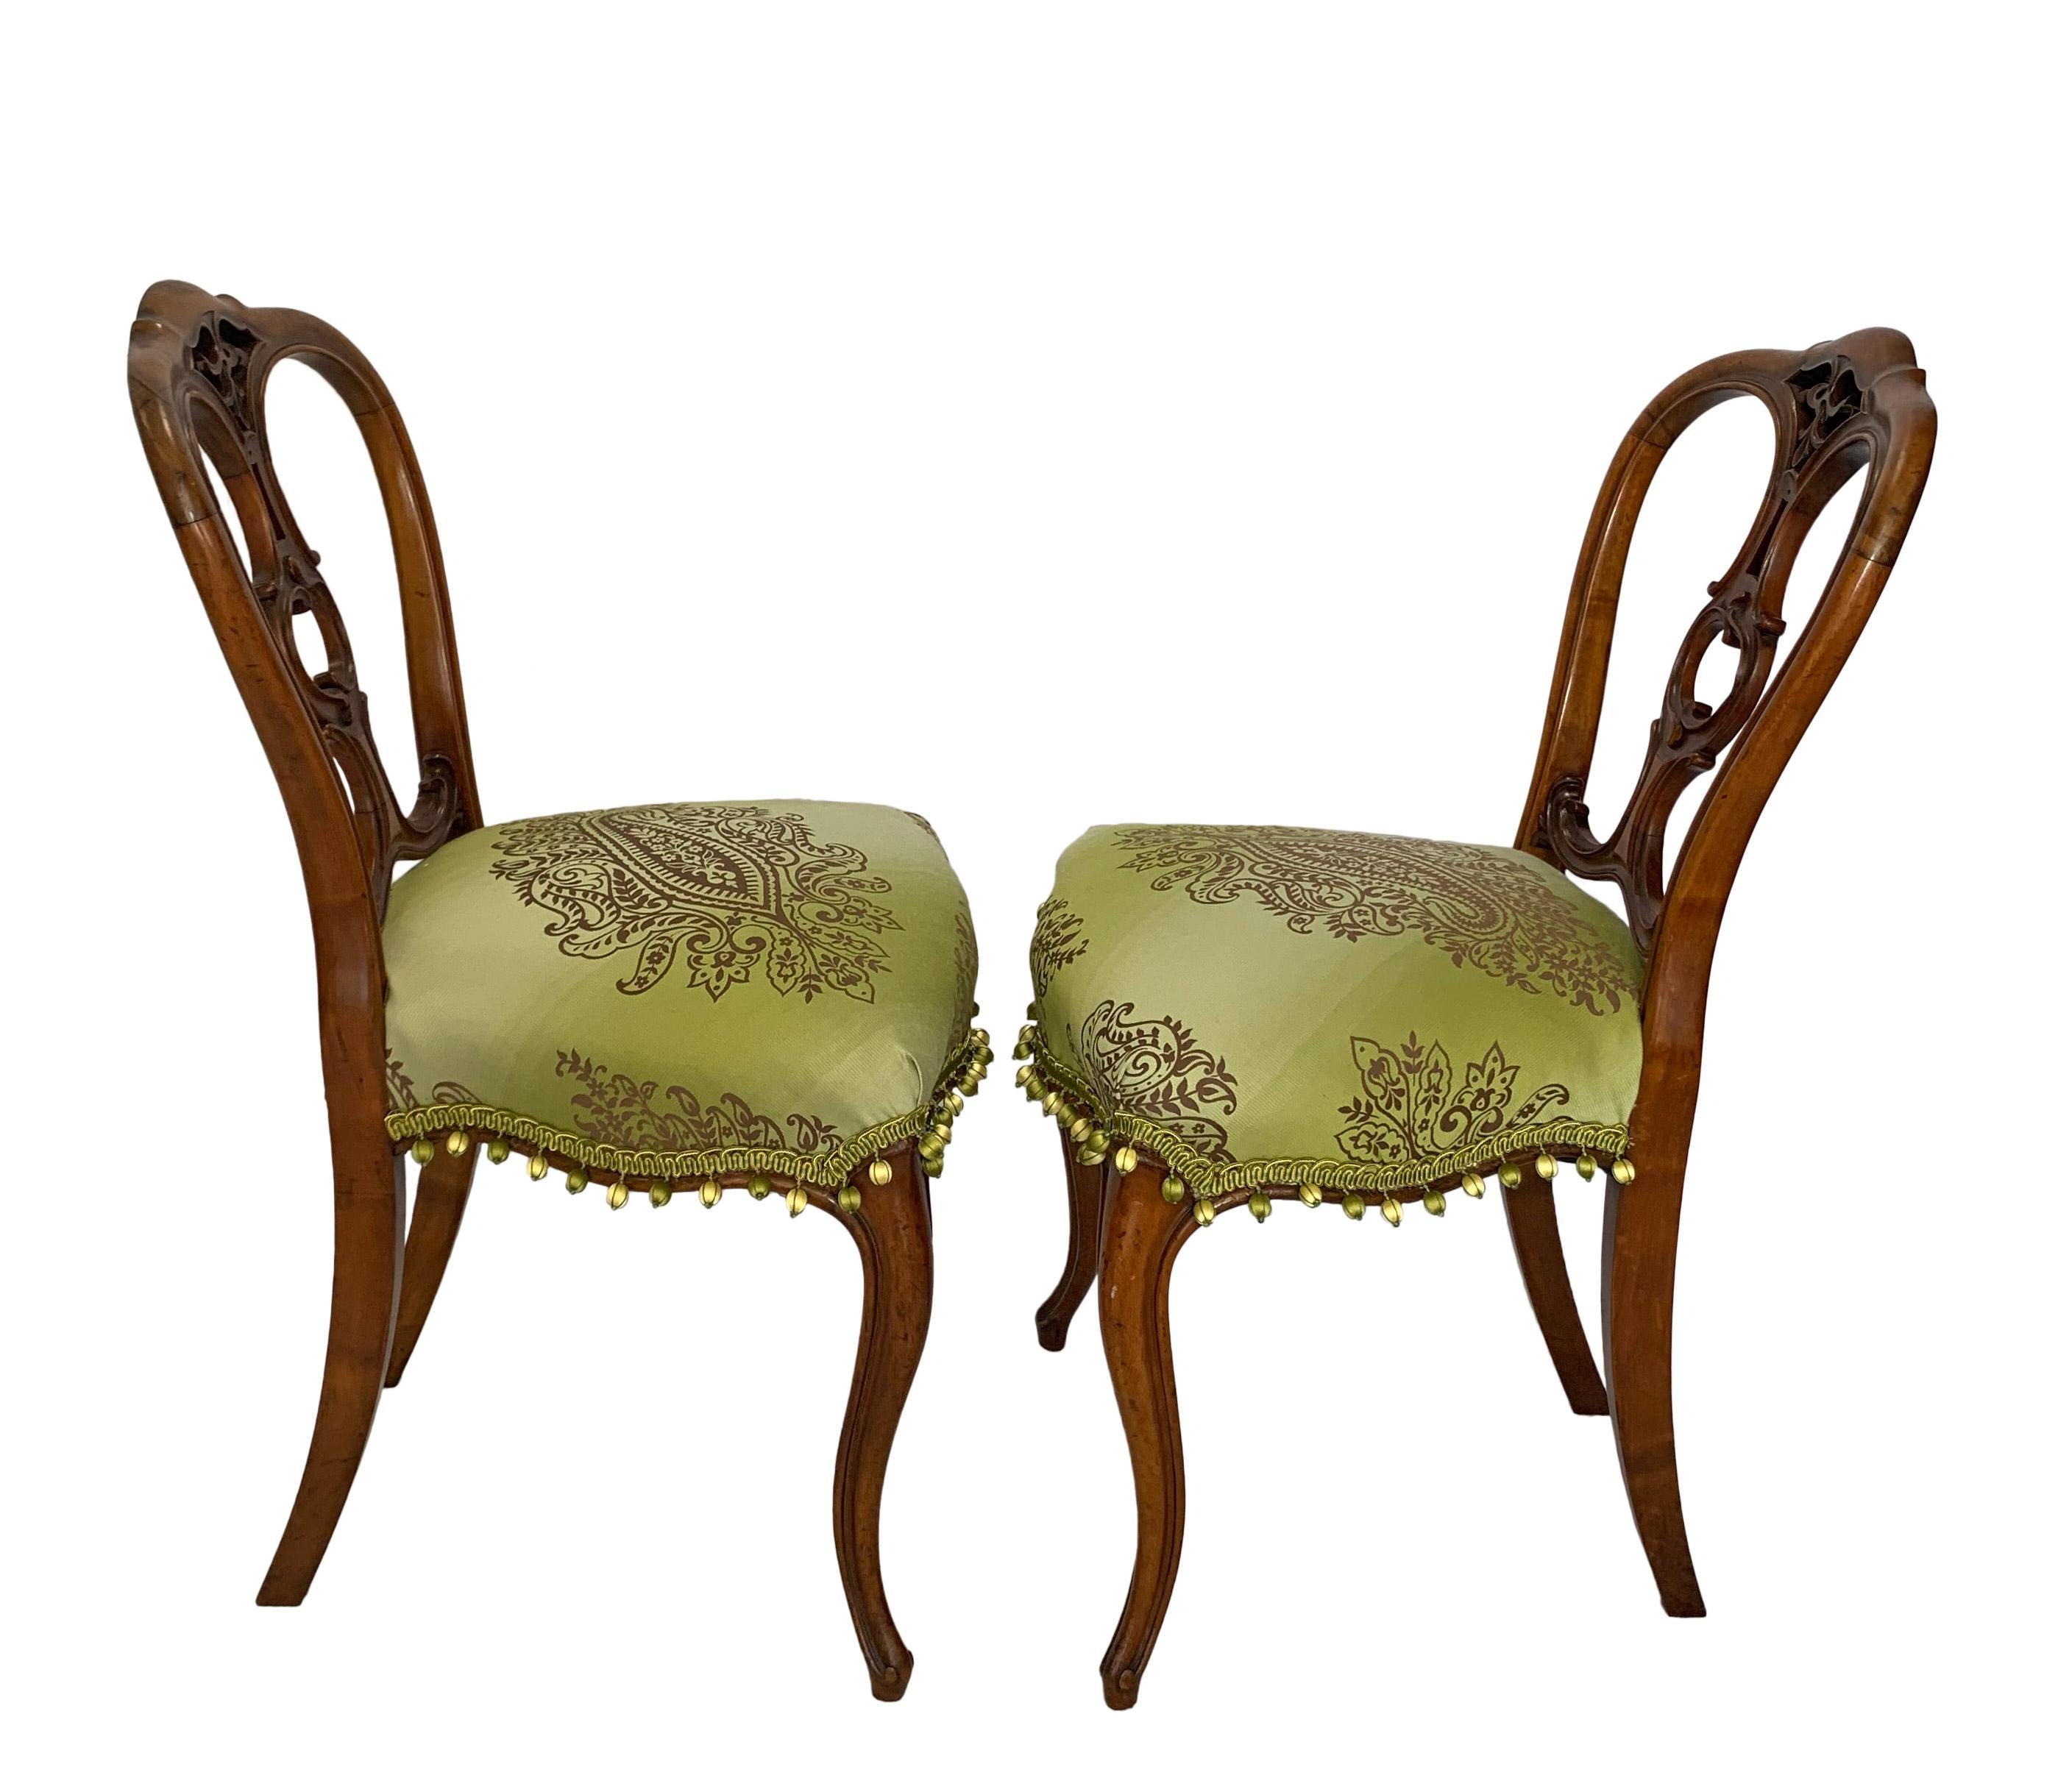 Early 20th Century Petite Victorian Style Elegantly Sculpted Balloon Back Chairs For Sale 2